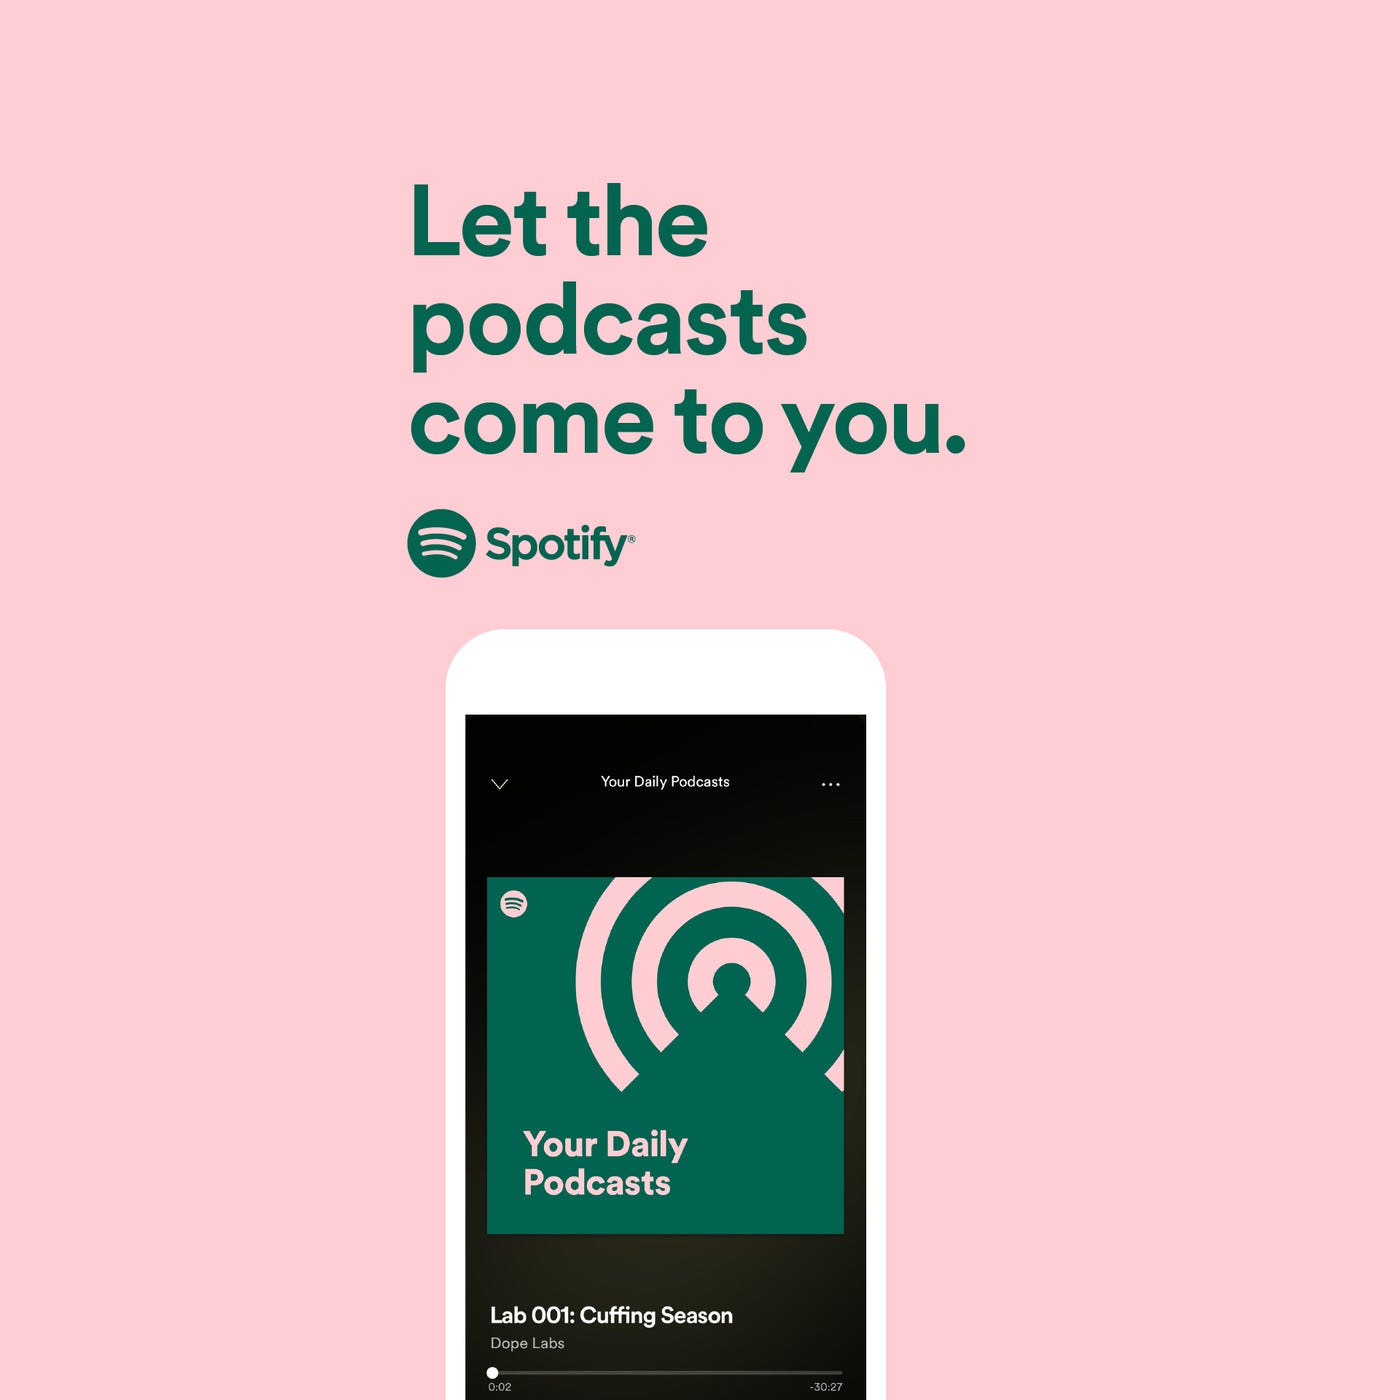 Spotify will let its podcast hosts include full songs in their